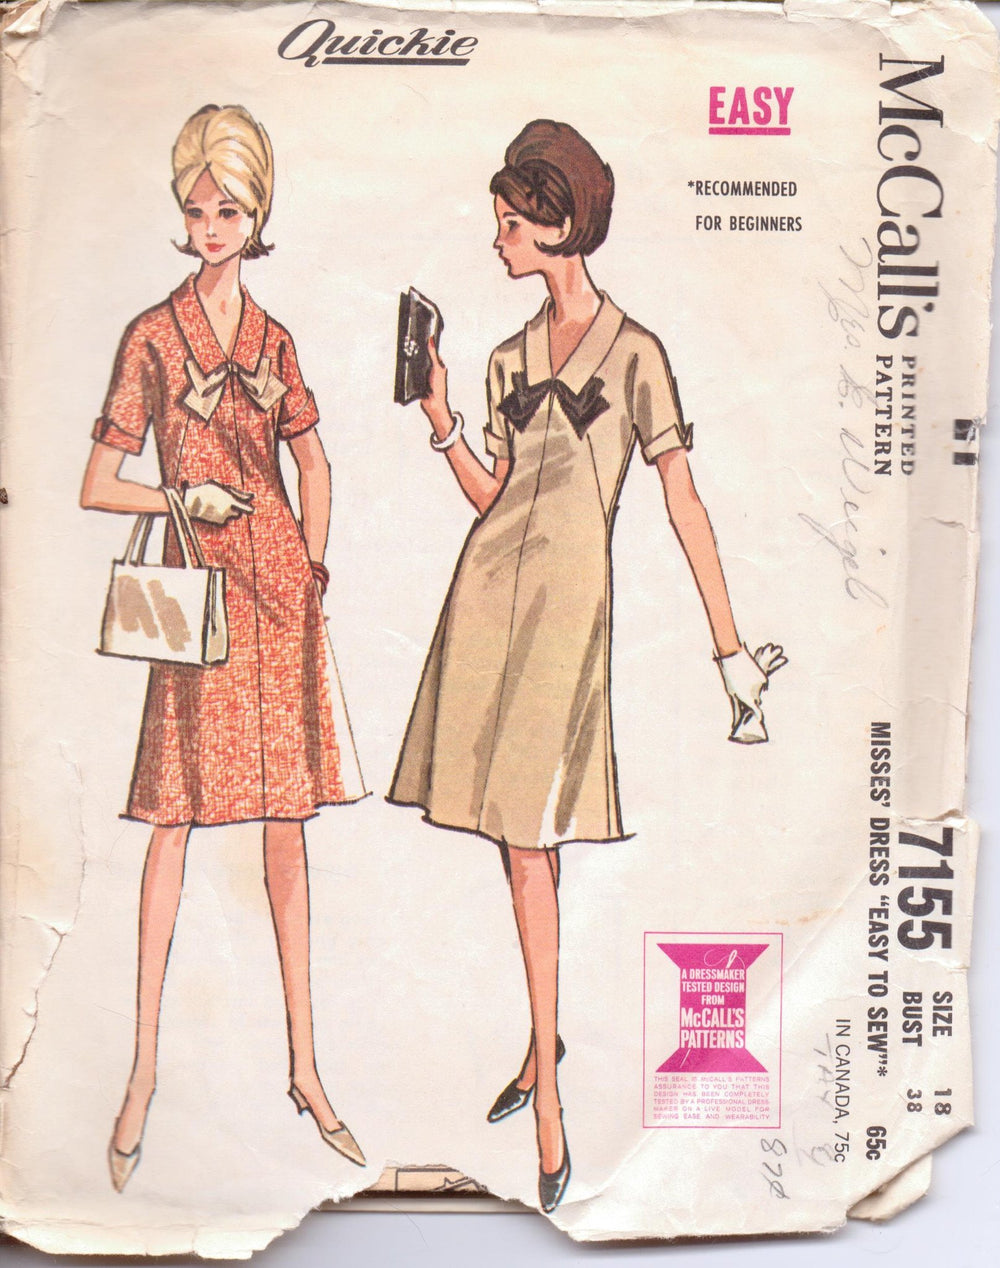 McCall's 7155 Ladies Dress Pattern French Darts Vintage 1960's Sewing Pattern Size 18 Bust 38 - VintageStitching - Vintage Sewing Patterns